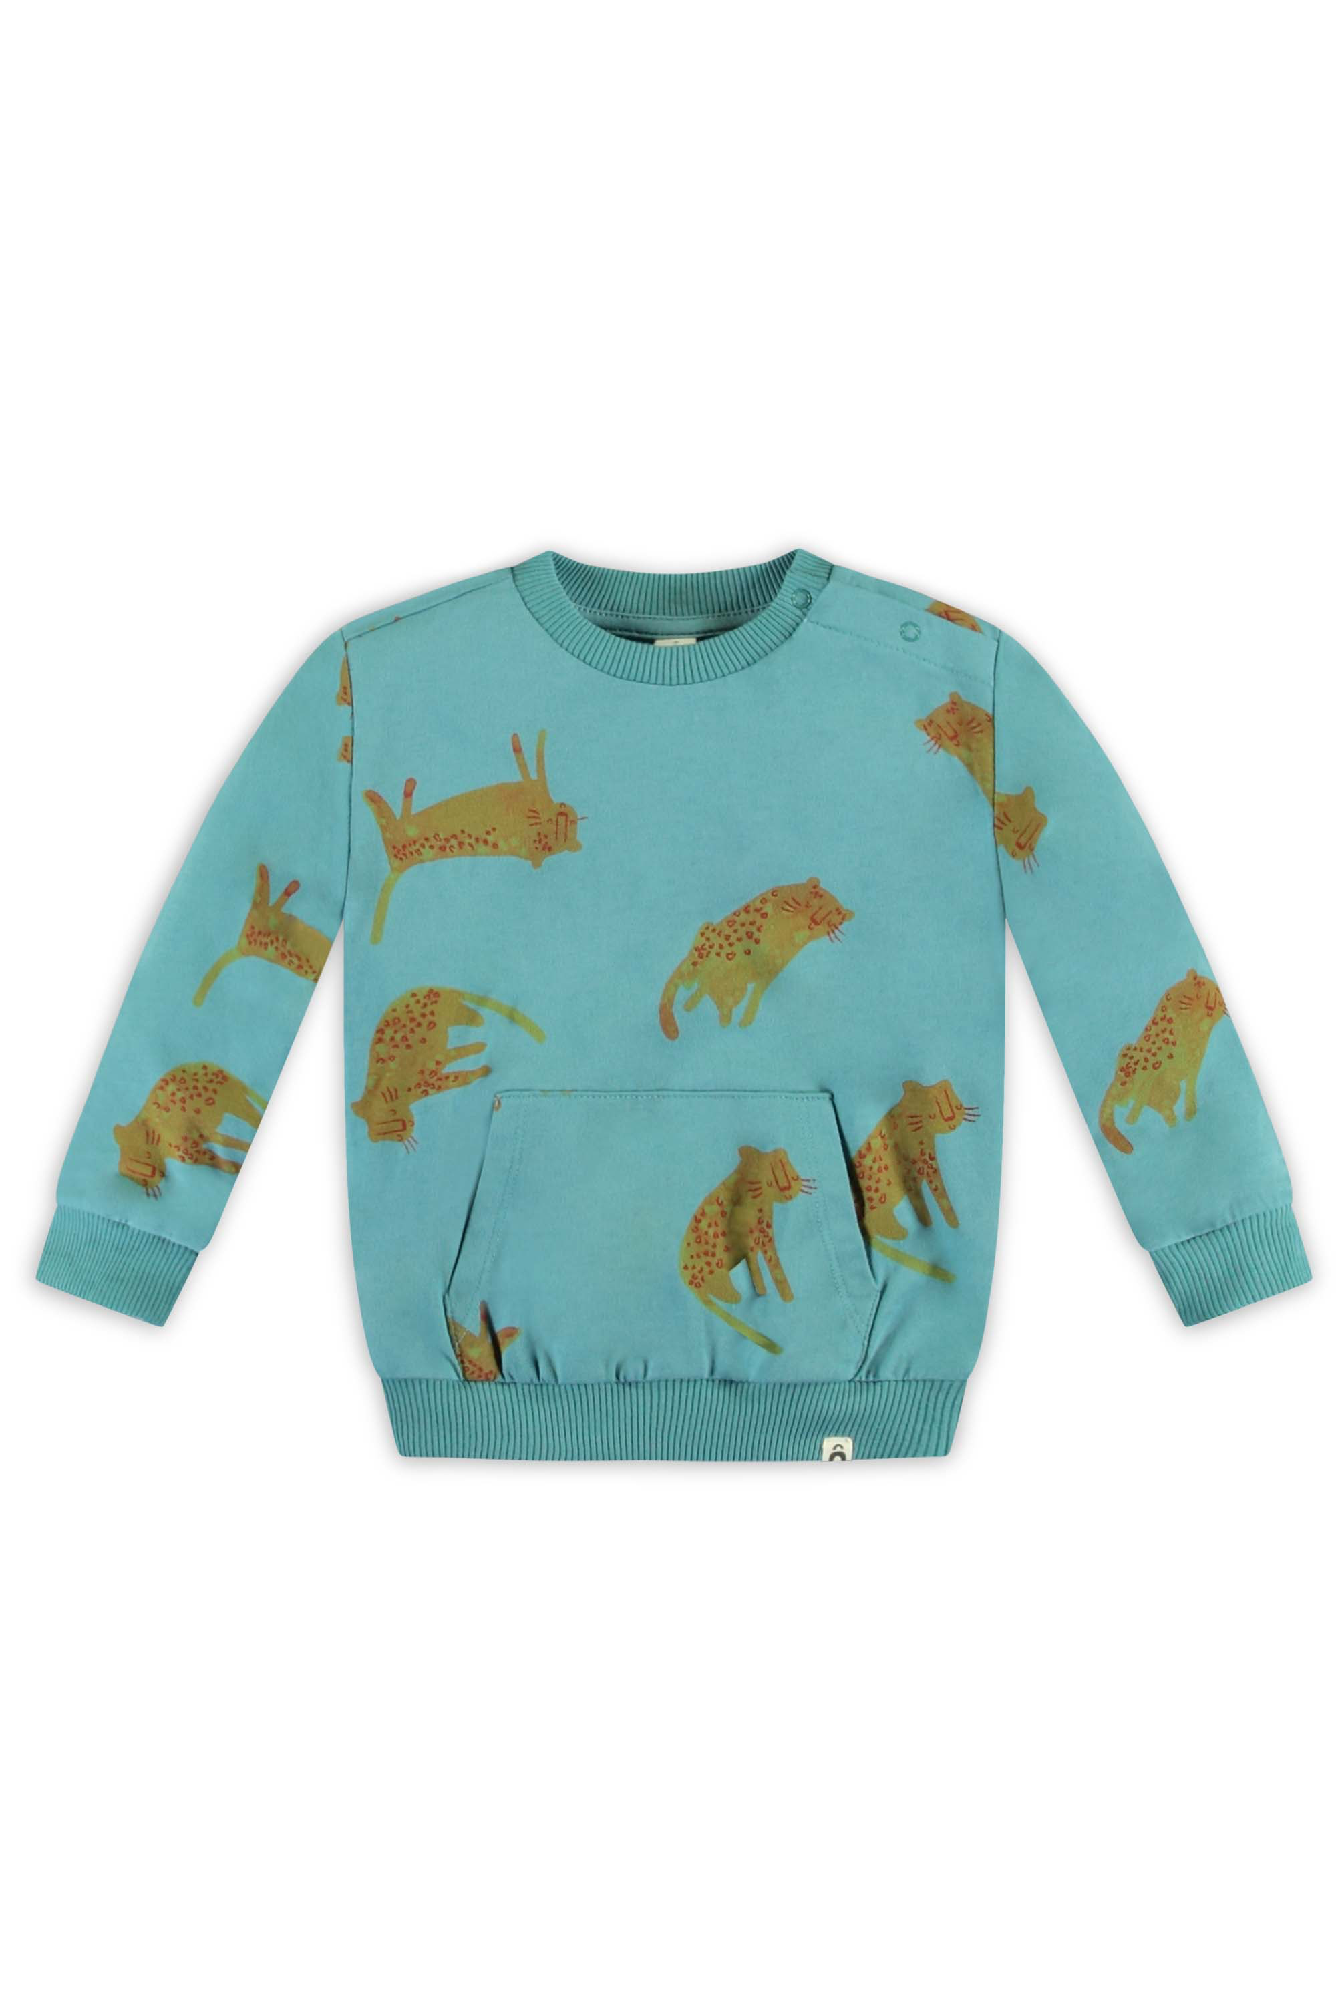 Jongens Sweater with wild panther aop and pouch pocket van The New Chapter in de kleur Wild panther ao in maat 86.